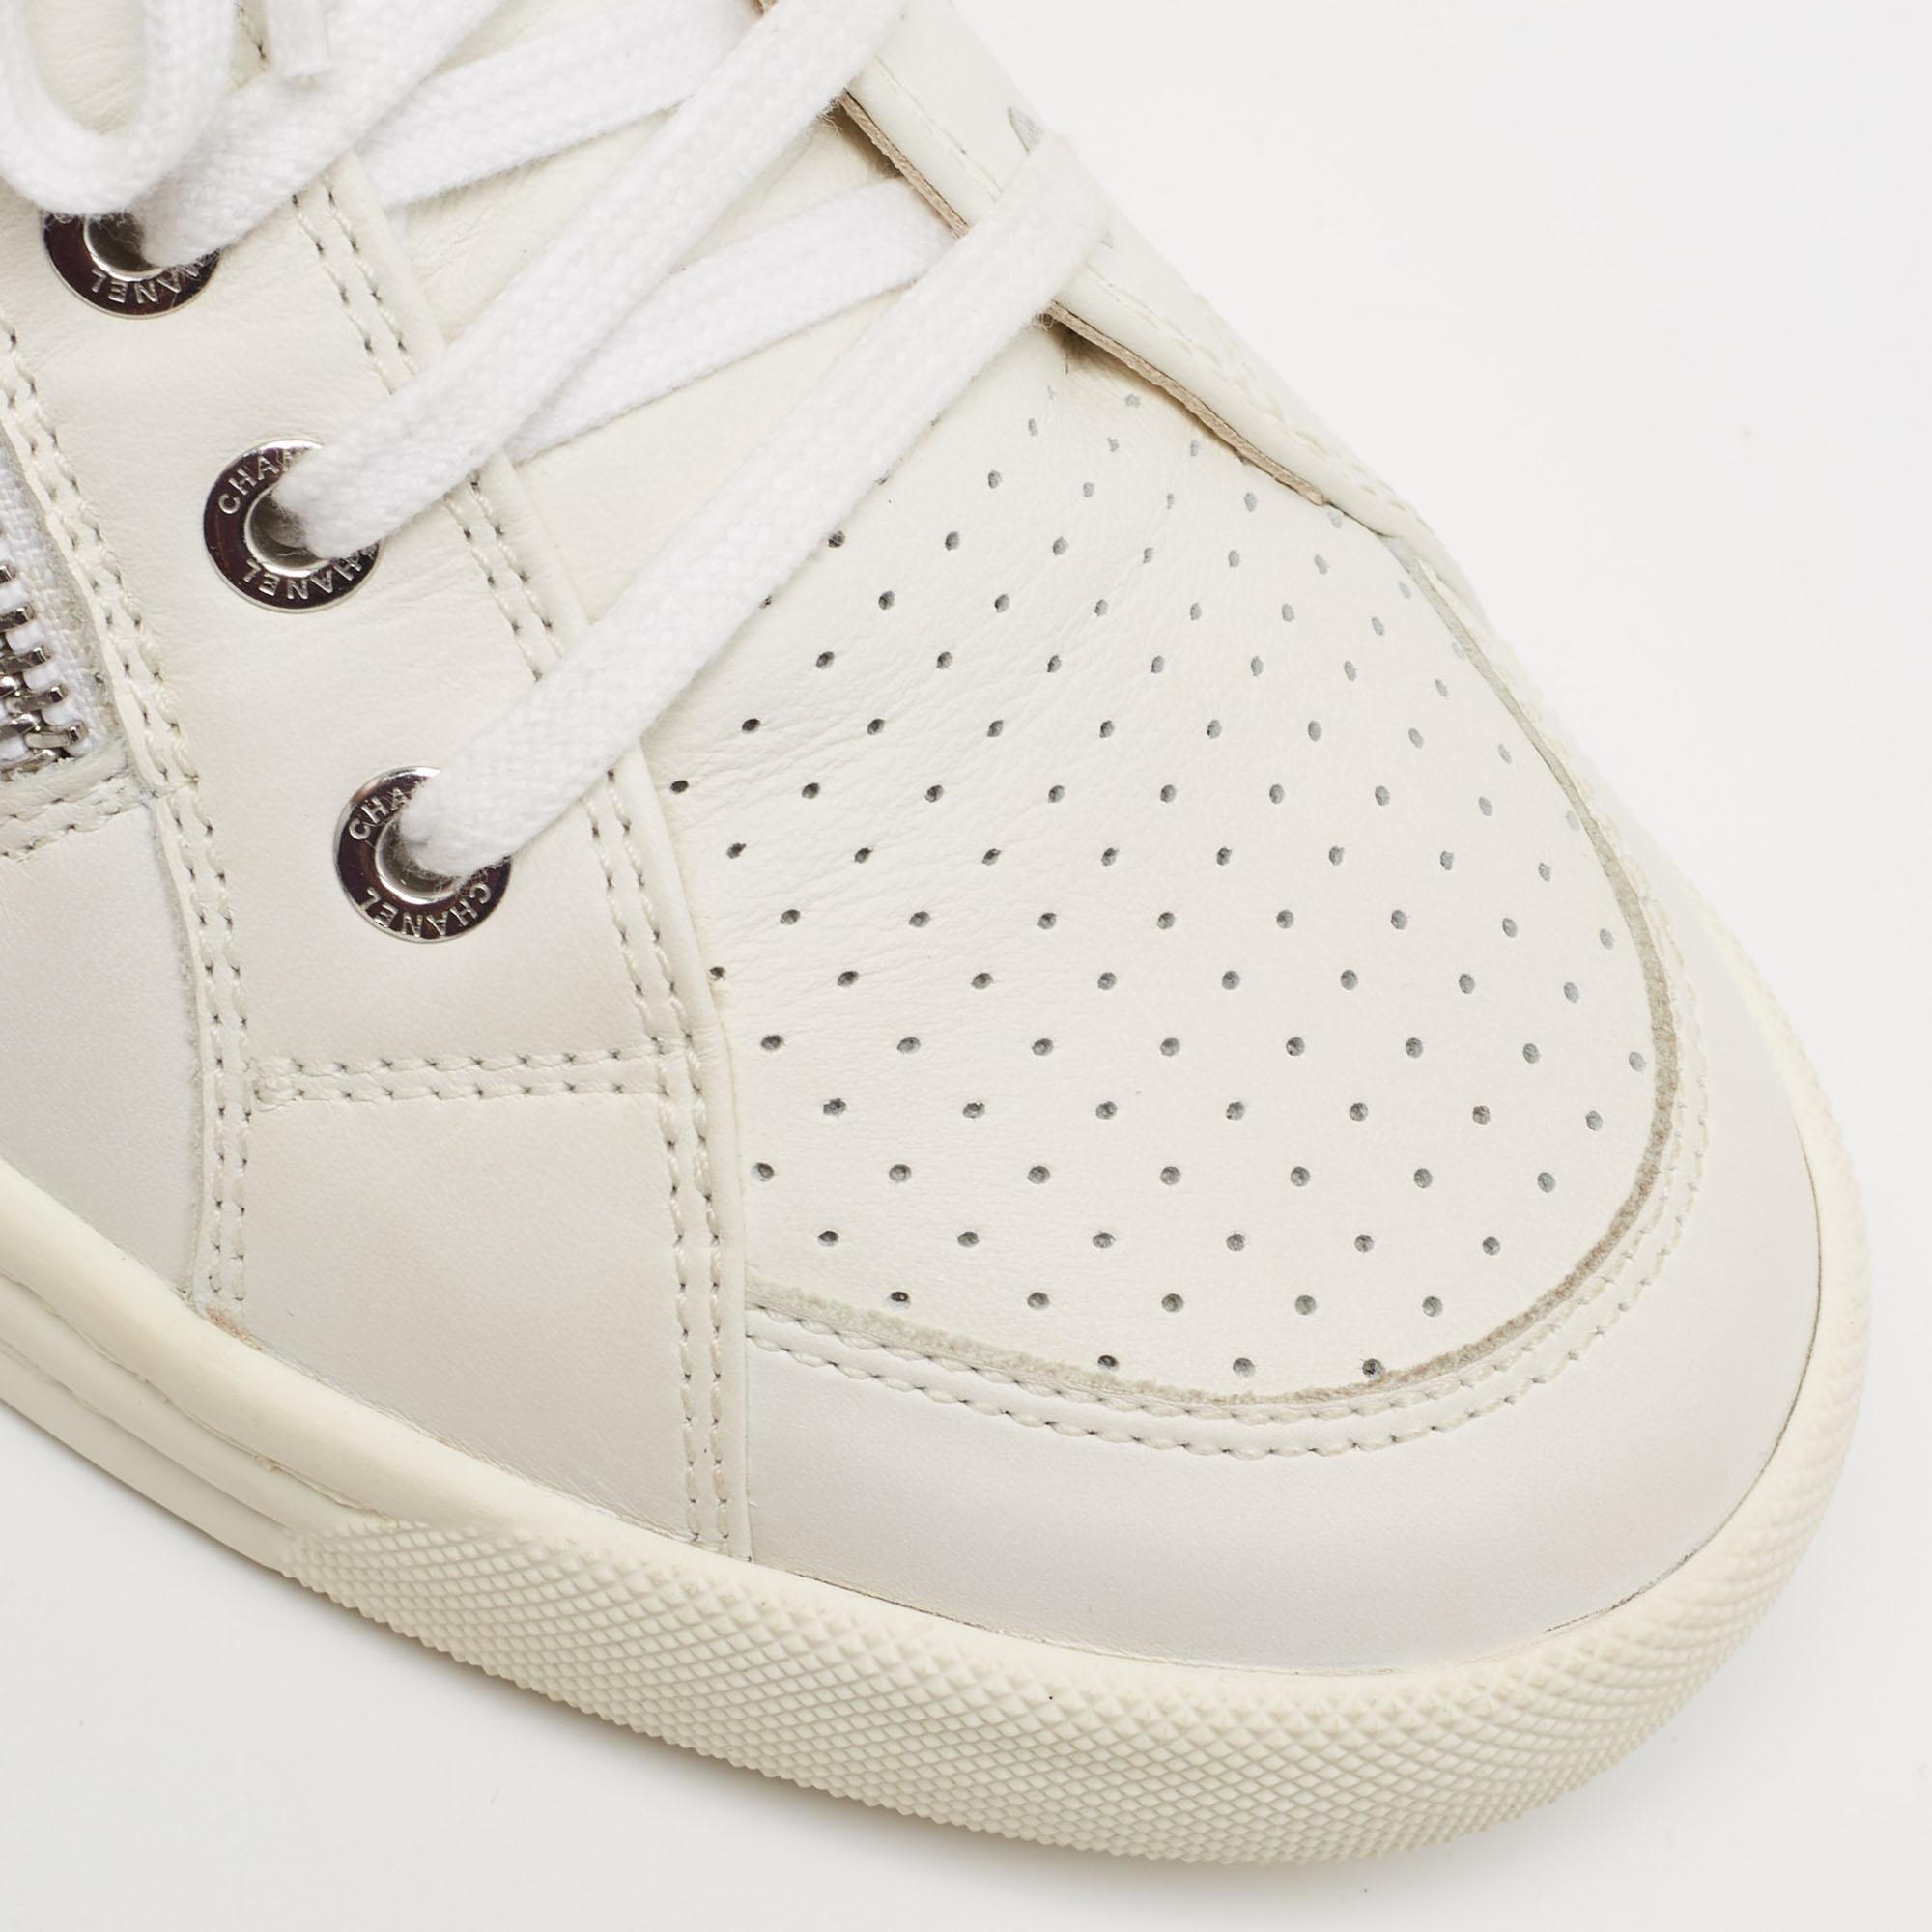 Women's Chanel White Leather CC High Top Sneakers Size 37.5